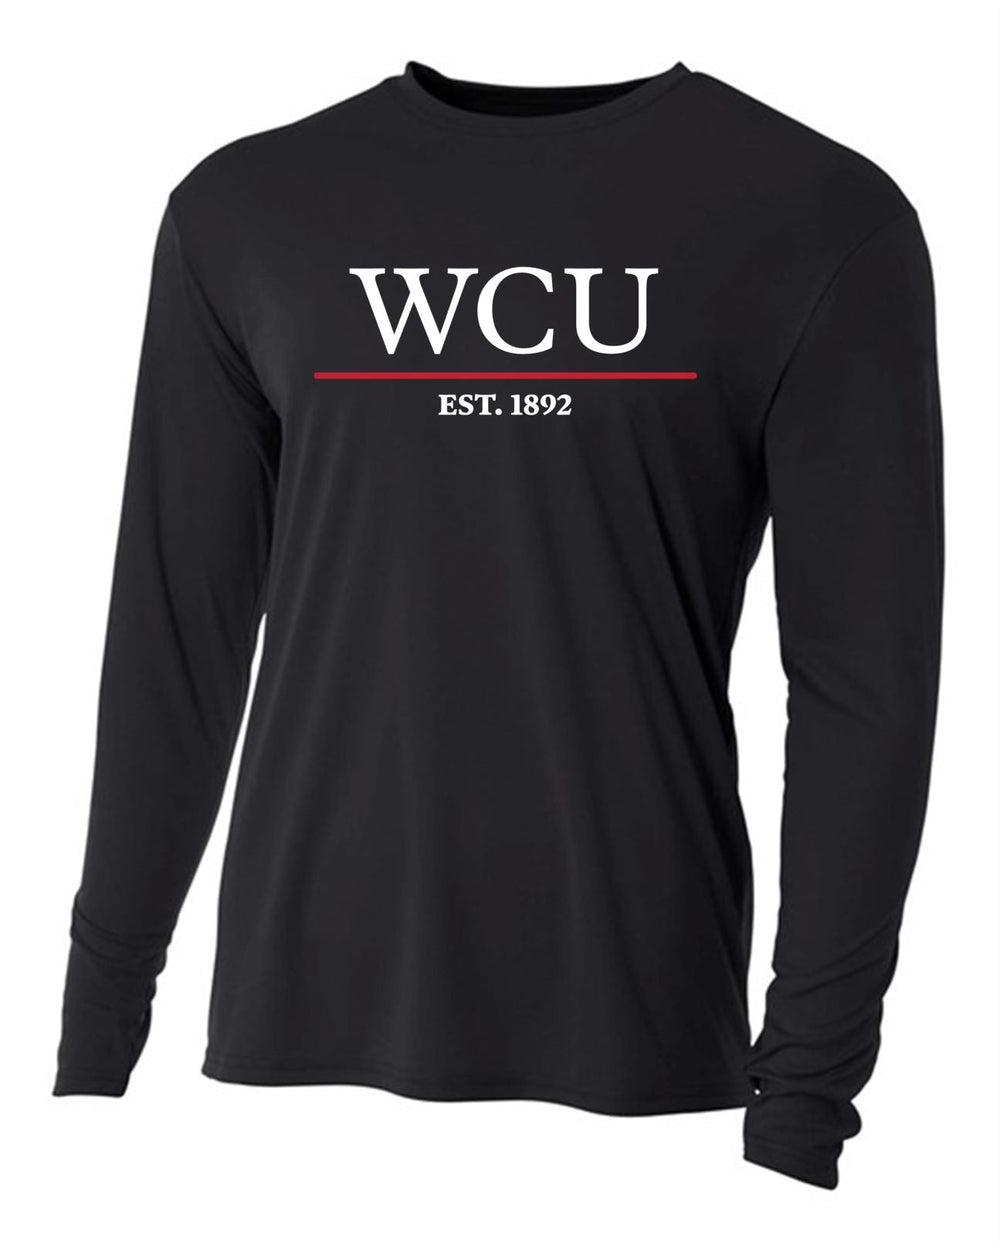 WCU Cooper School Of Missions & Ministry Youth Long-Sleeve Performance Shirt WCU CSMM Black Youth Small - Third Coast Soccer